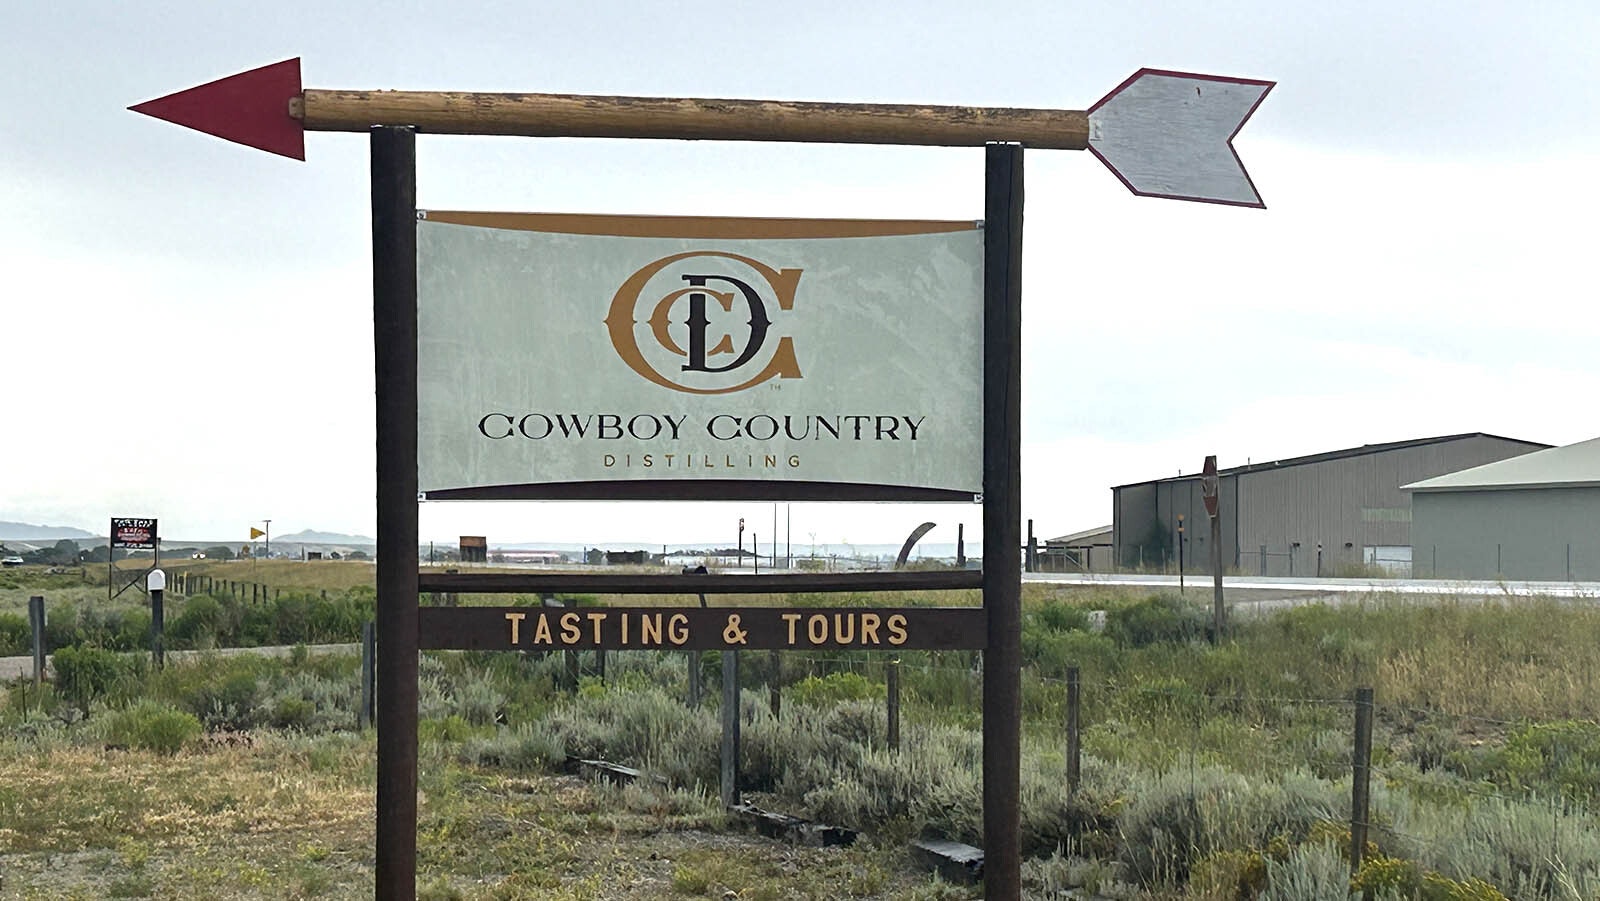 A sign shows travelers the entrance to Cowboy Country Distilling.